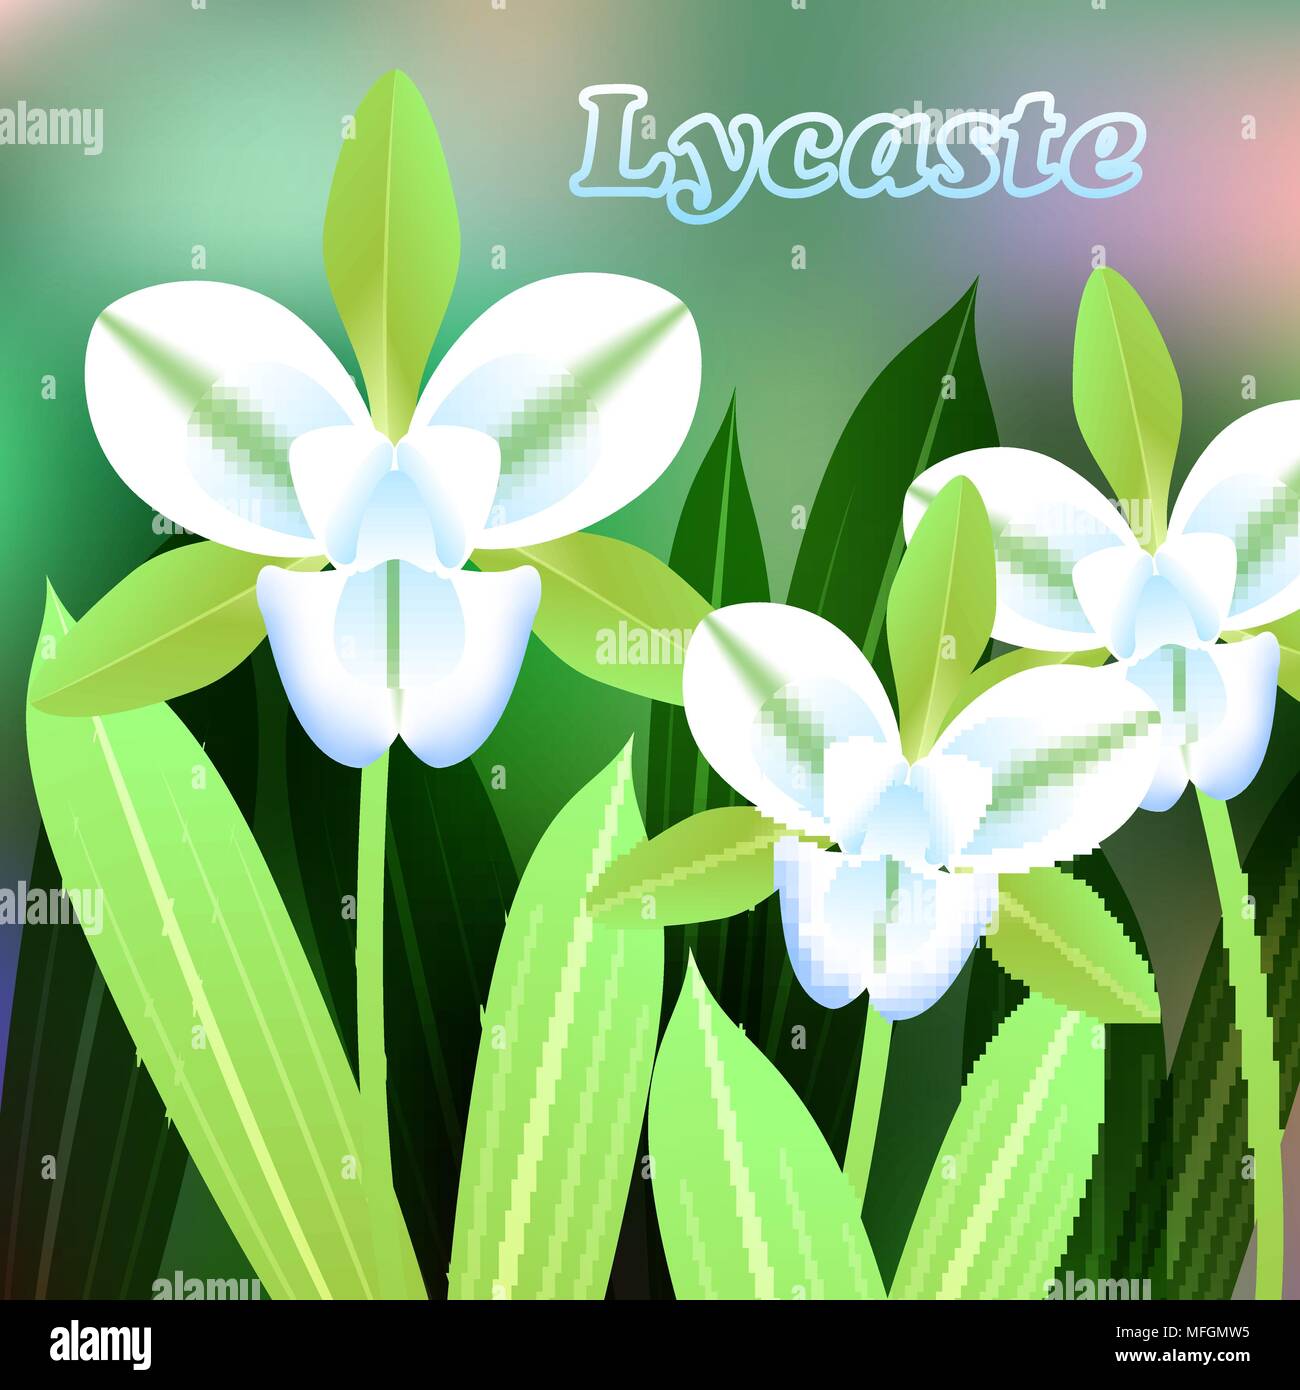 Beautiful Flower, Illustration of Lycaste orchid with Green Leaves on Tree Branch. Vector illustration Stock Vector